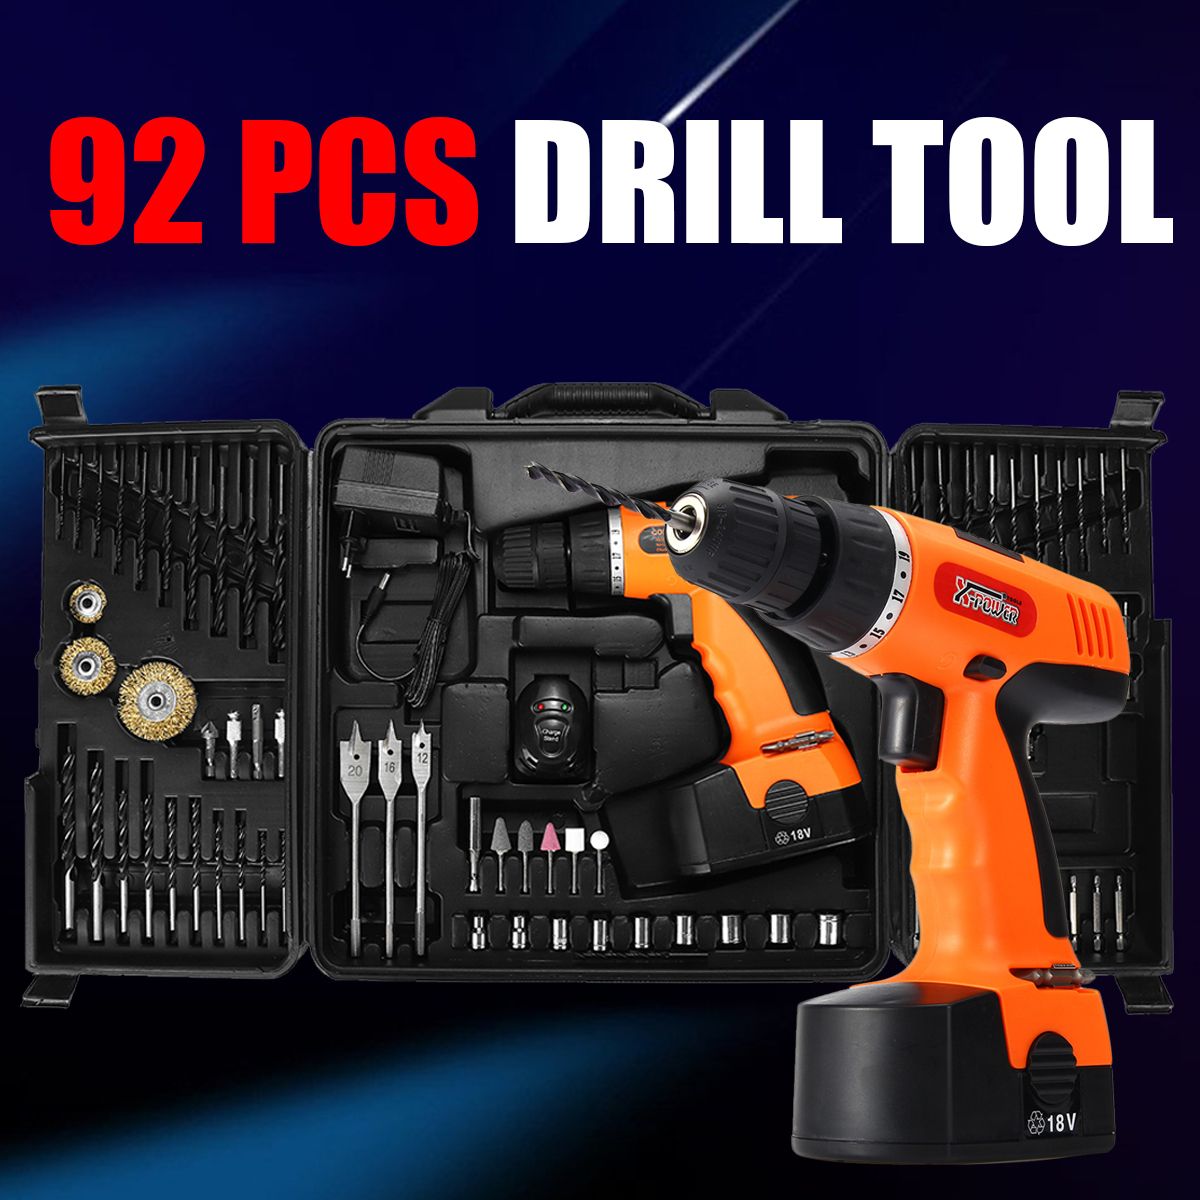 92Pcs-18V-Electric-Drill-Cordless-Drill-Driver-Power-Drills-Tool-Accessory-Set-With-Box-1421423